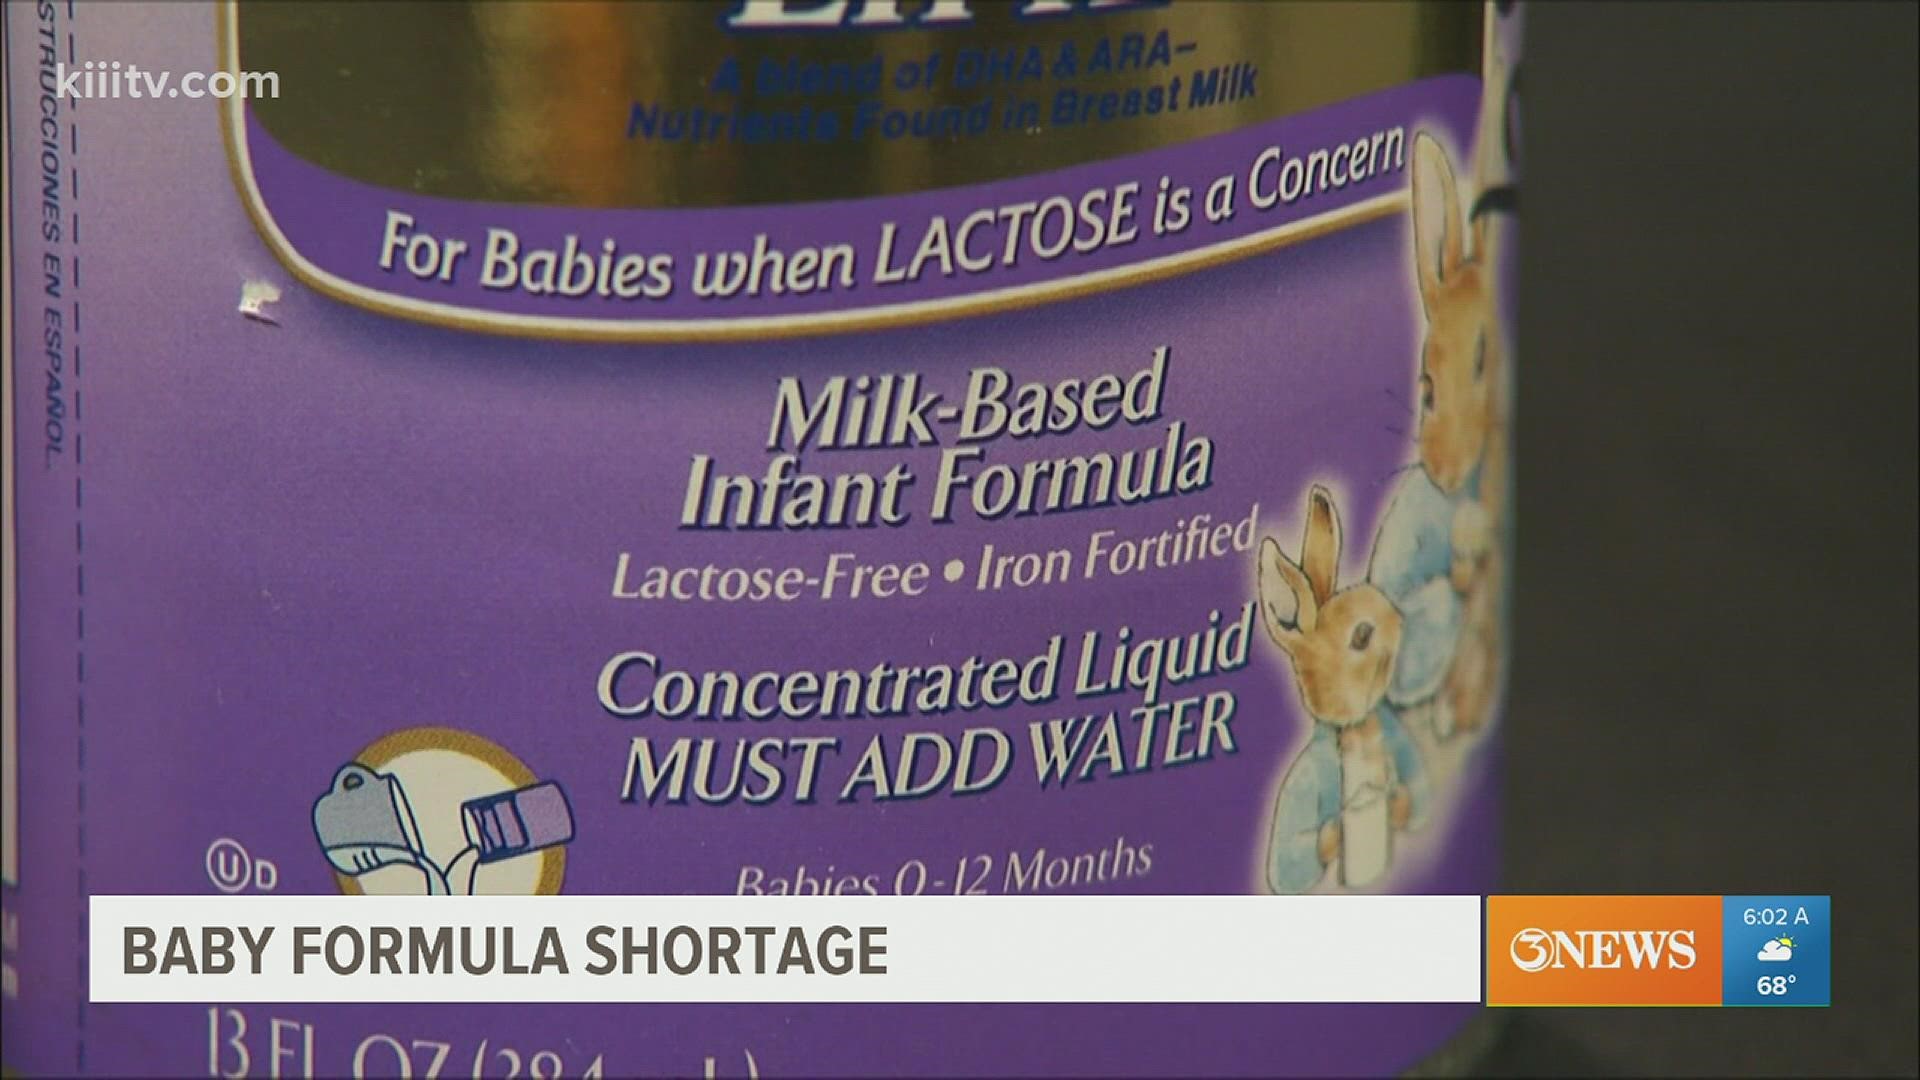 Dr. Surani said babies can start being introduced to solid foods at 4 months old.